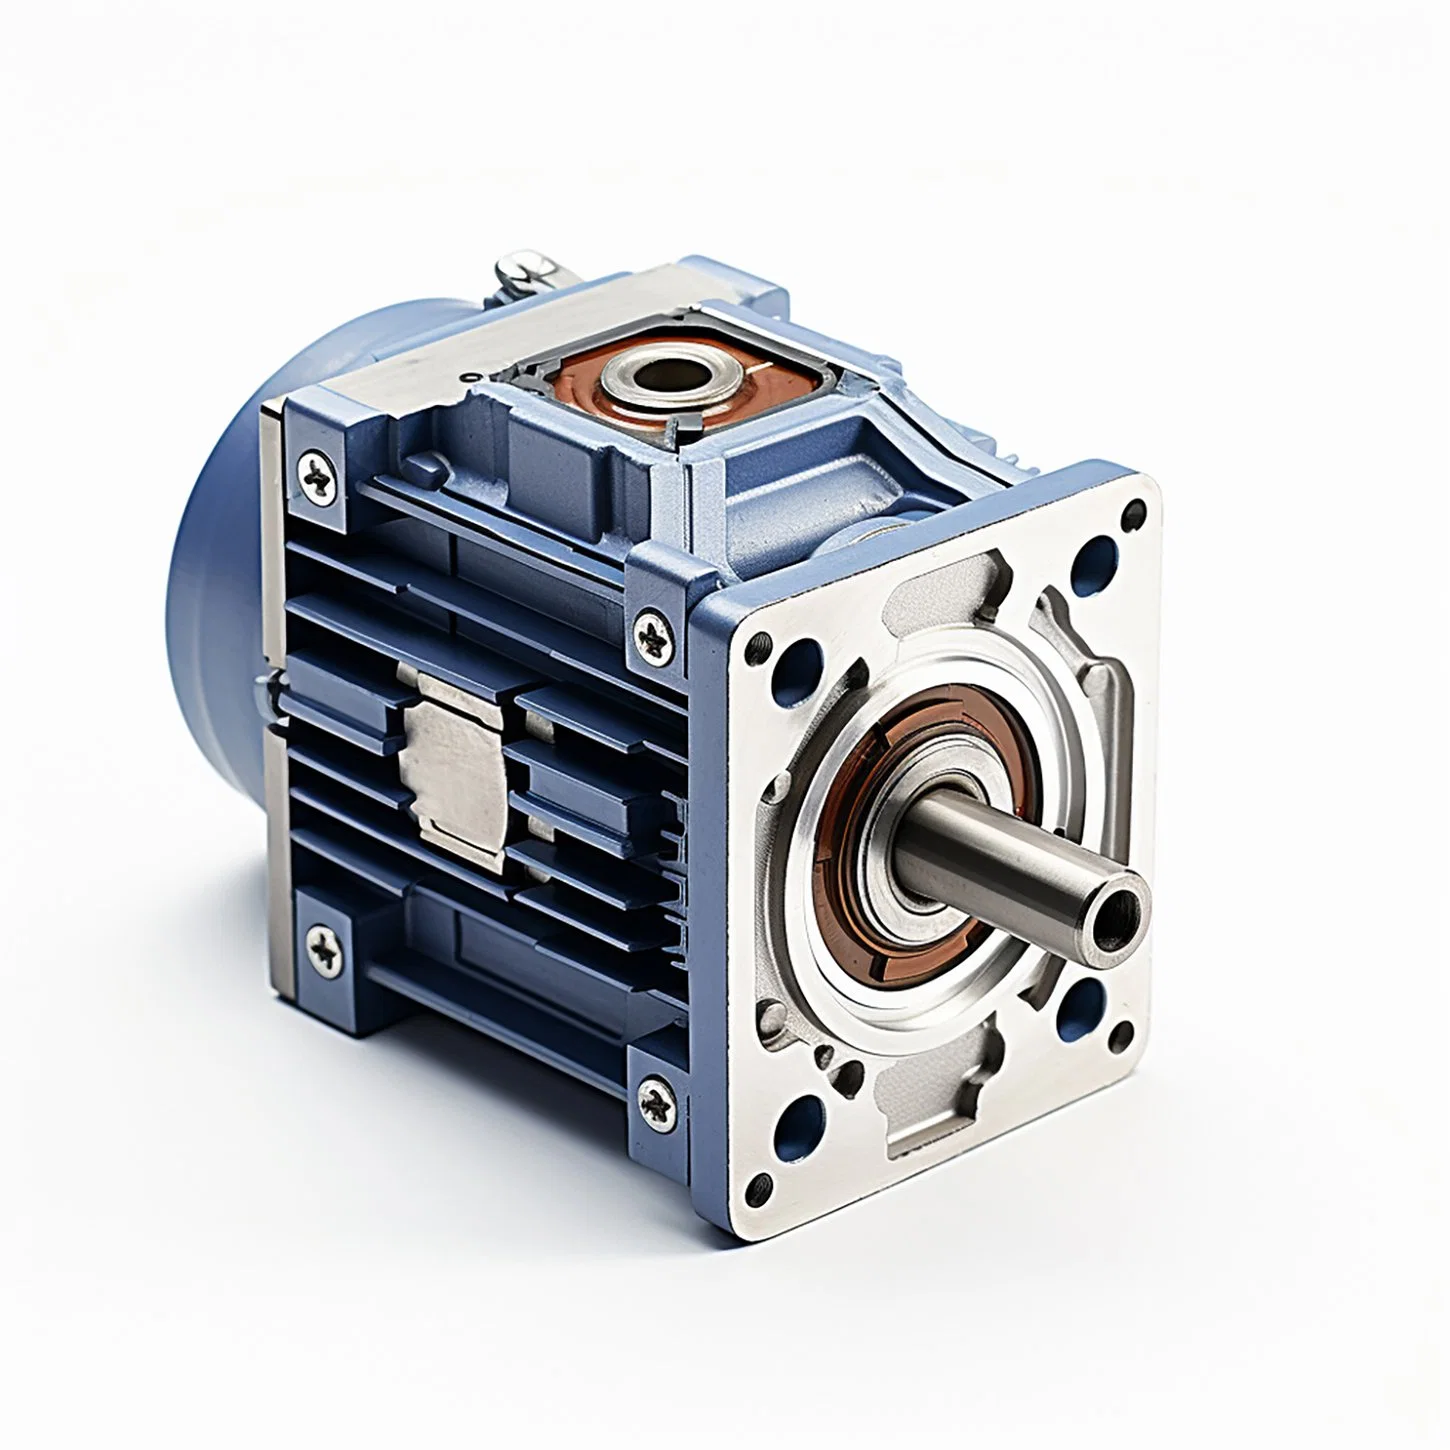 Versatile Pinion Gear Motor for 3D Printing Machinery